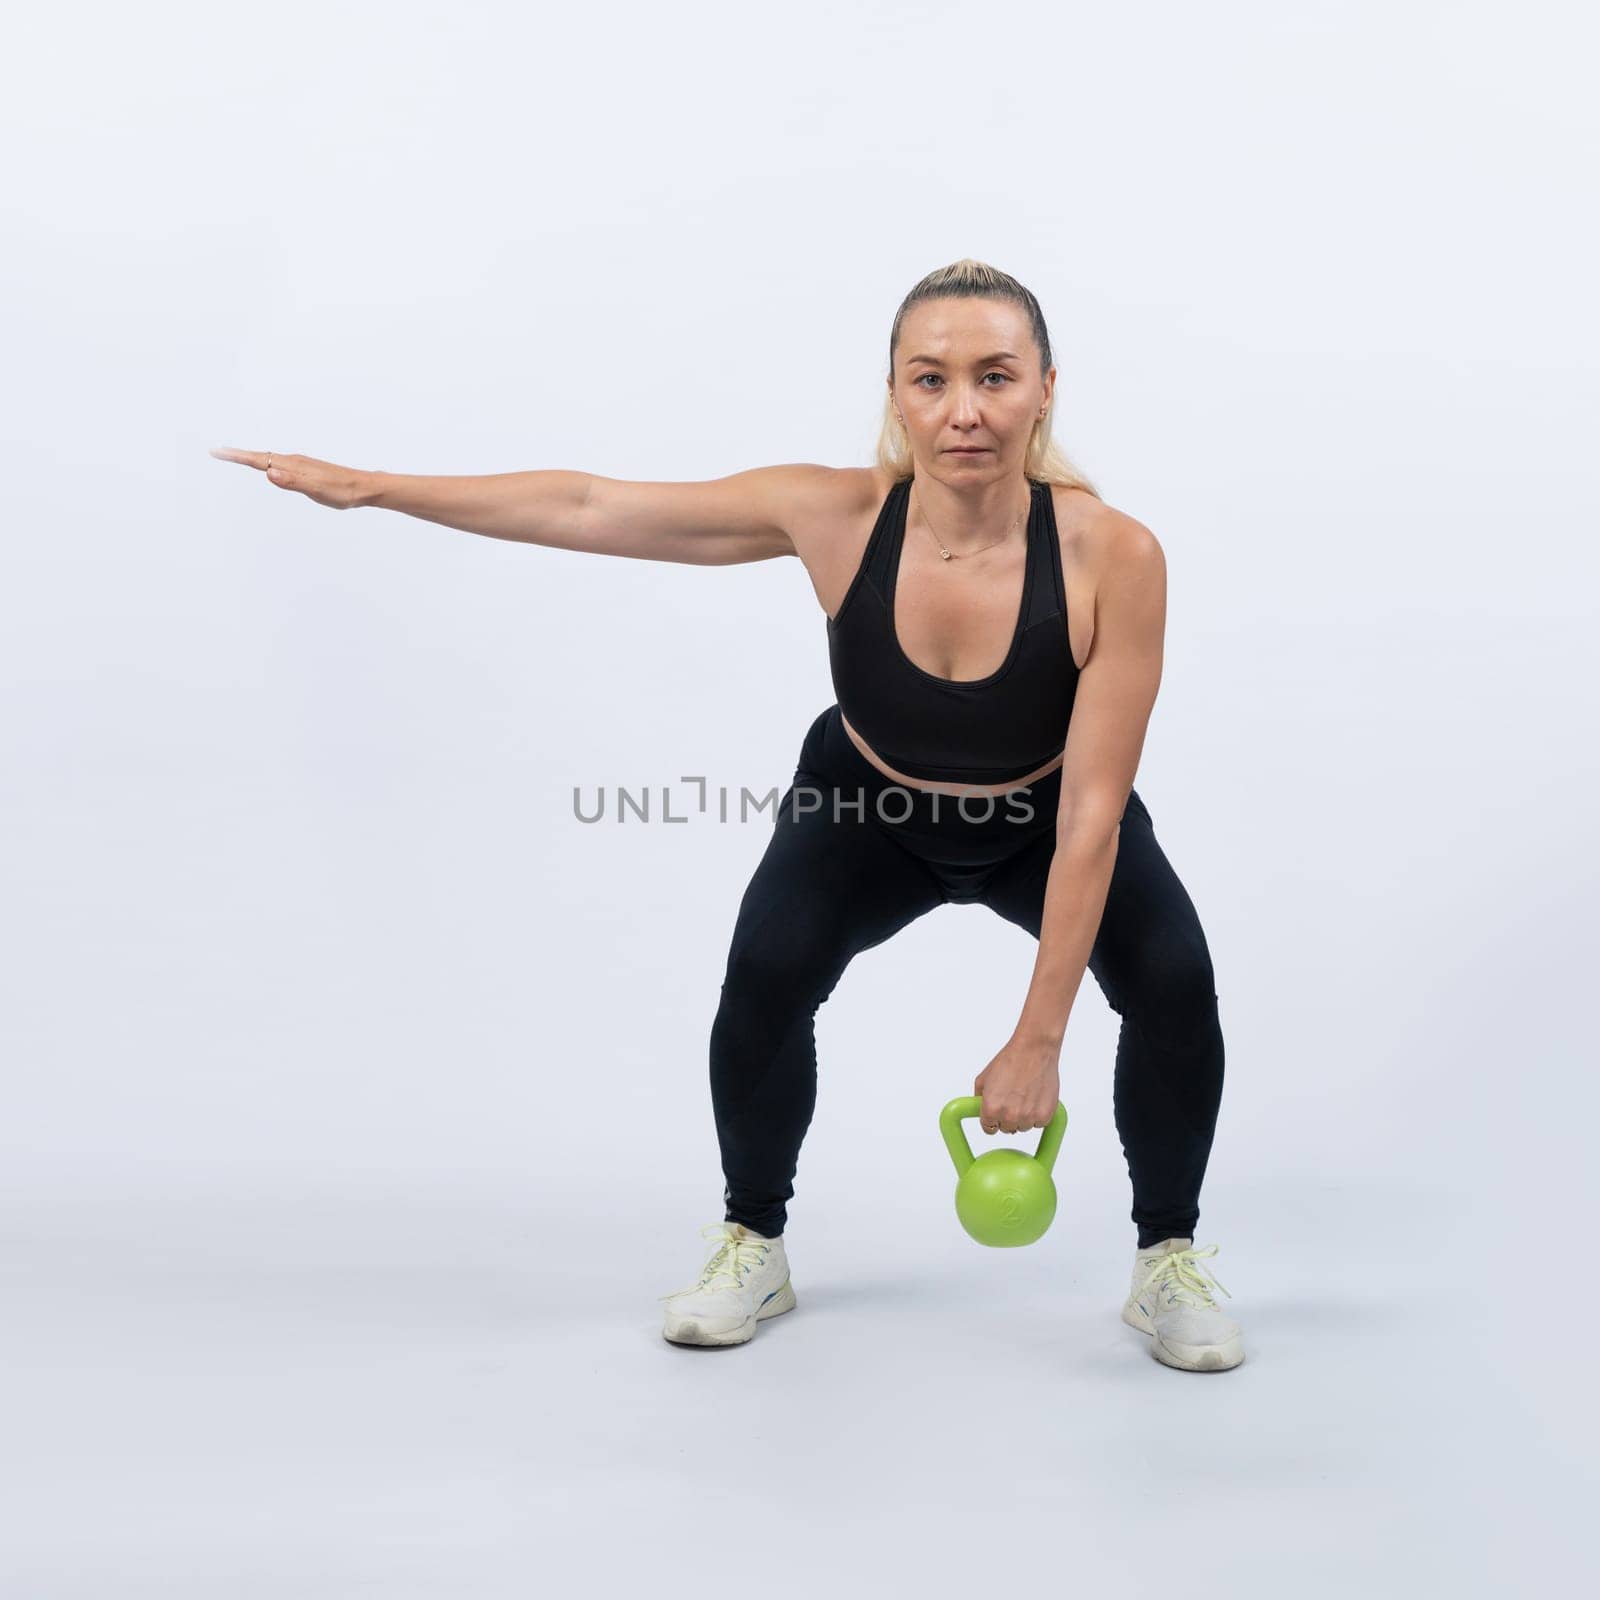 Full body length shot athletic and sporty senior woman doing squat with kettlebell for body workout on isolated background. Healthy active physique and body care lifestyle after retirement. Clout